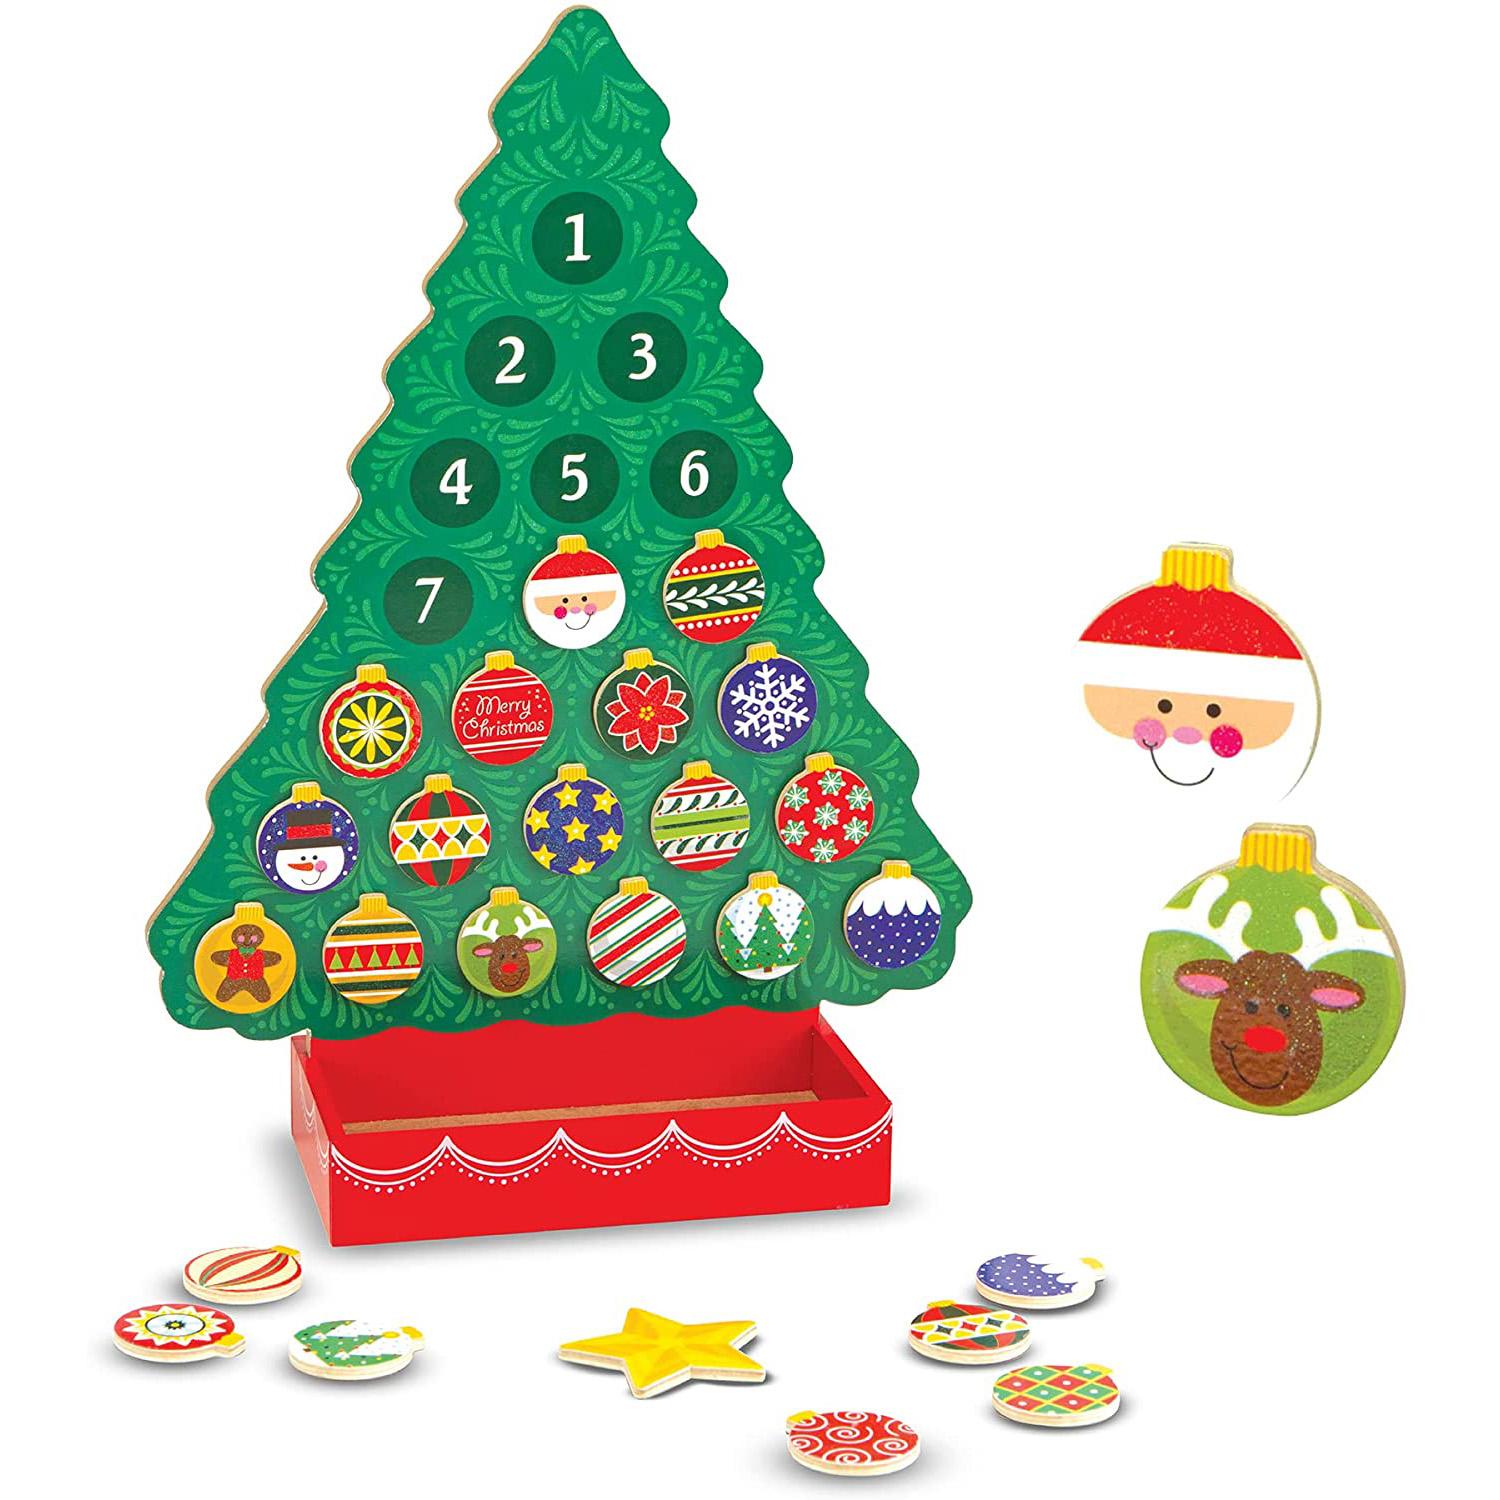 Melissa and Doug Countdown to Christmas Wooden Advent Calendar for $9.99